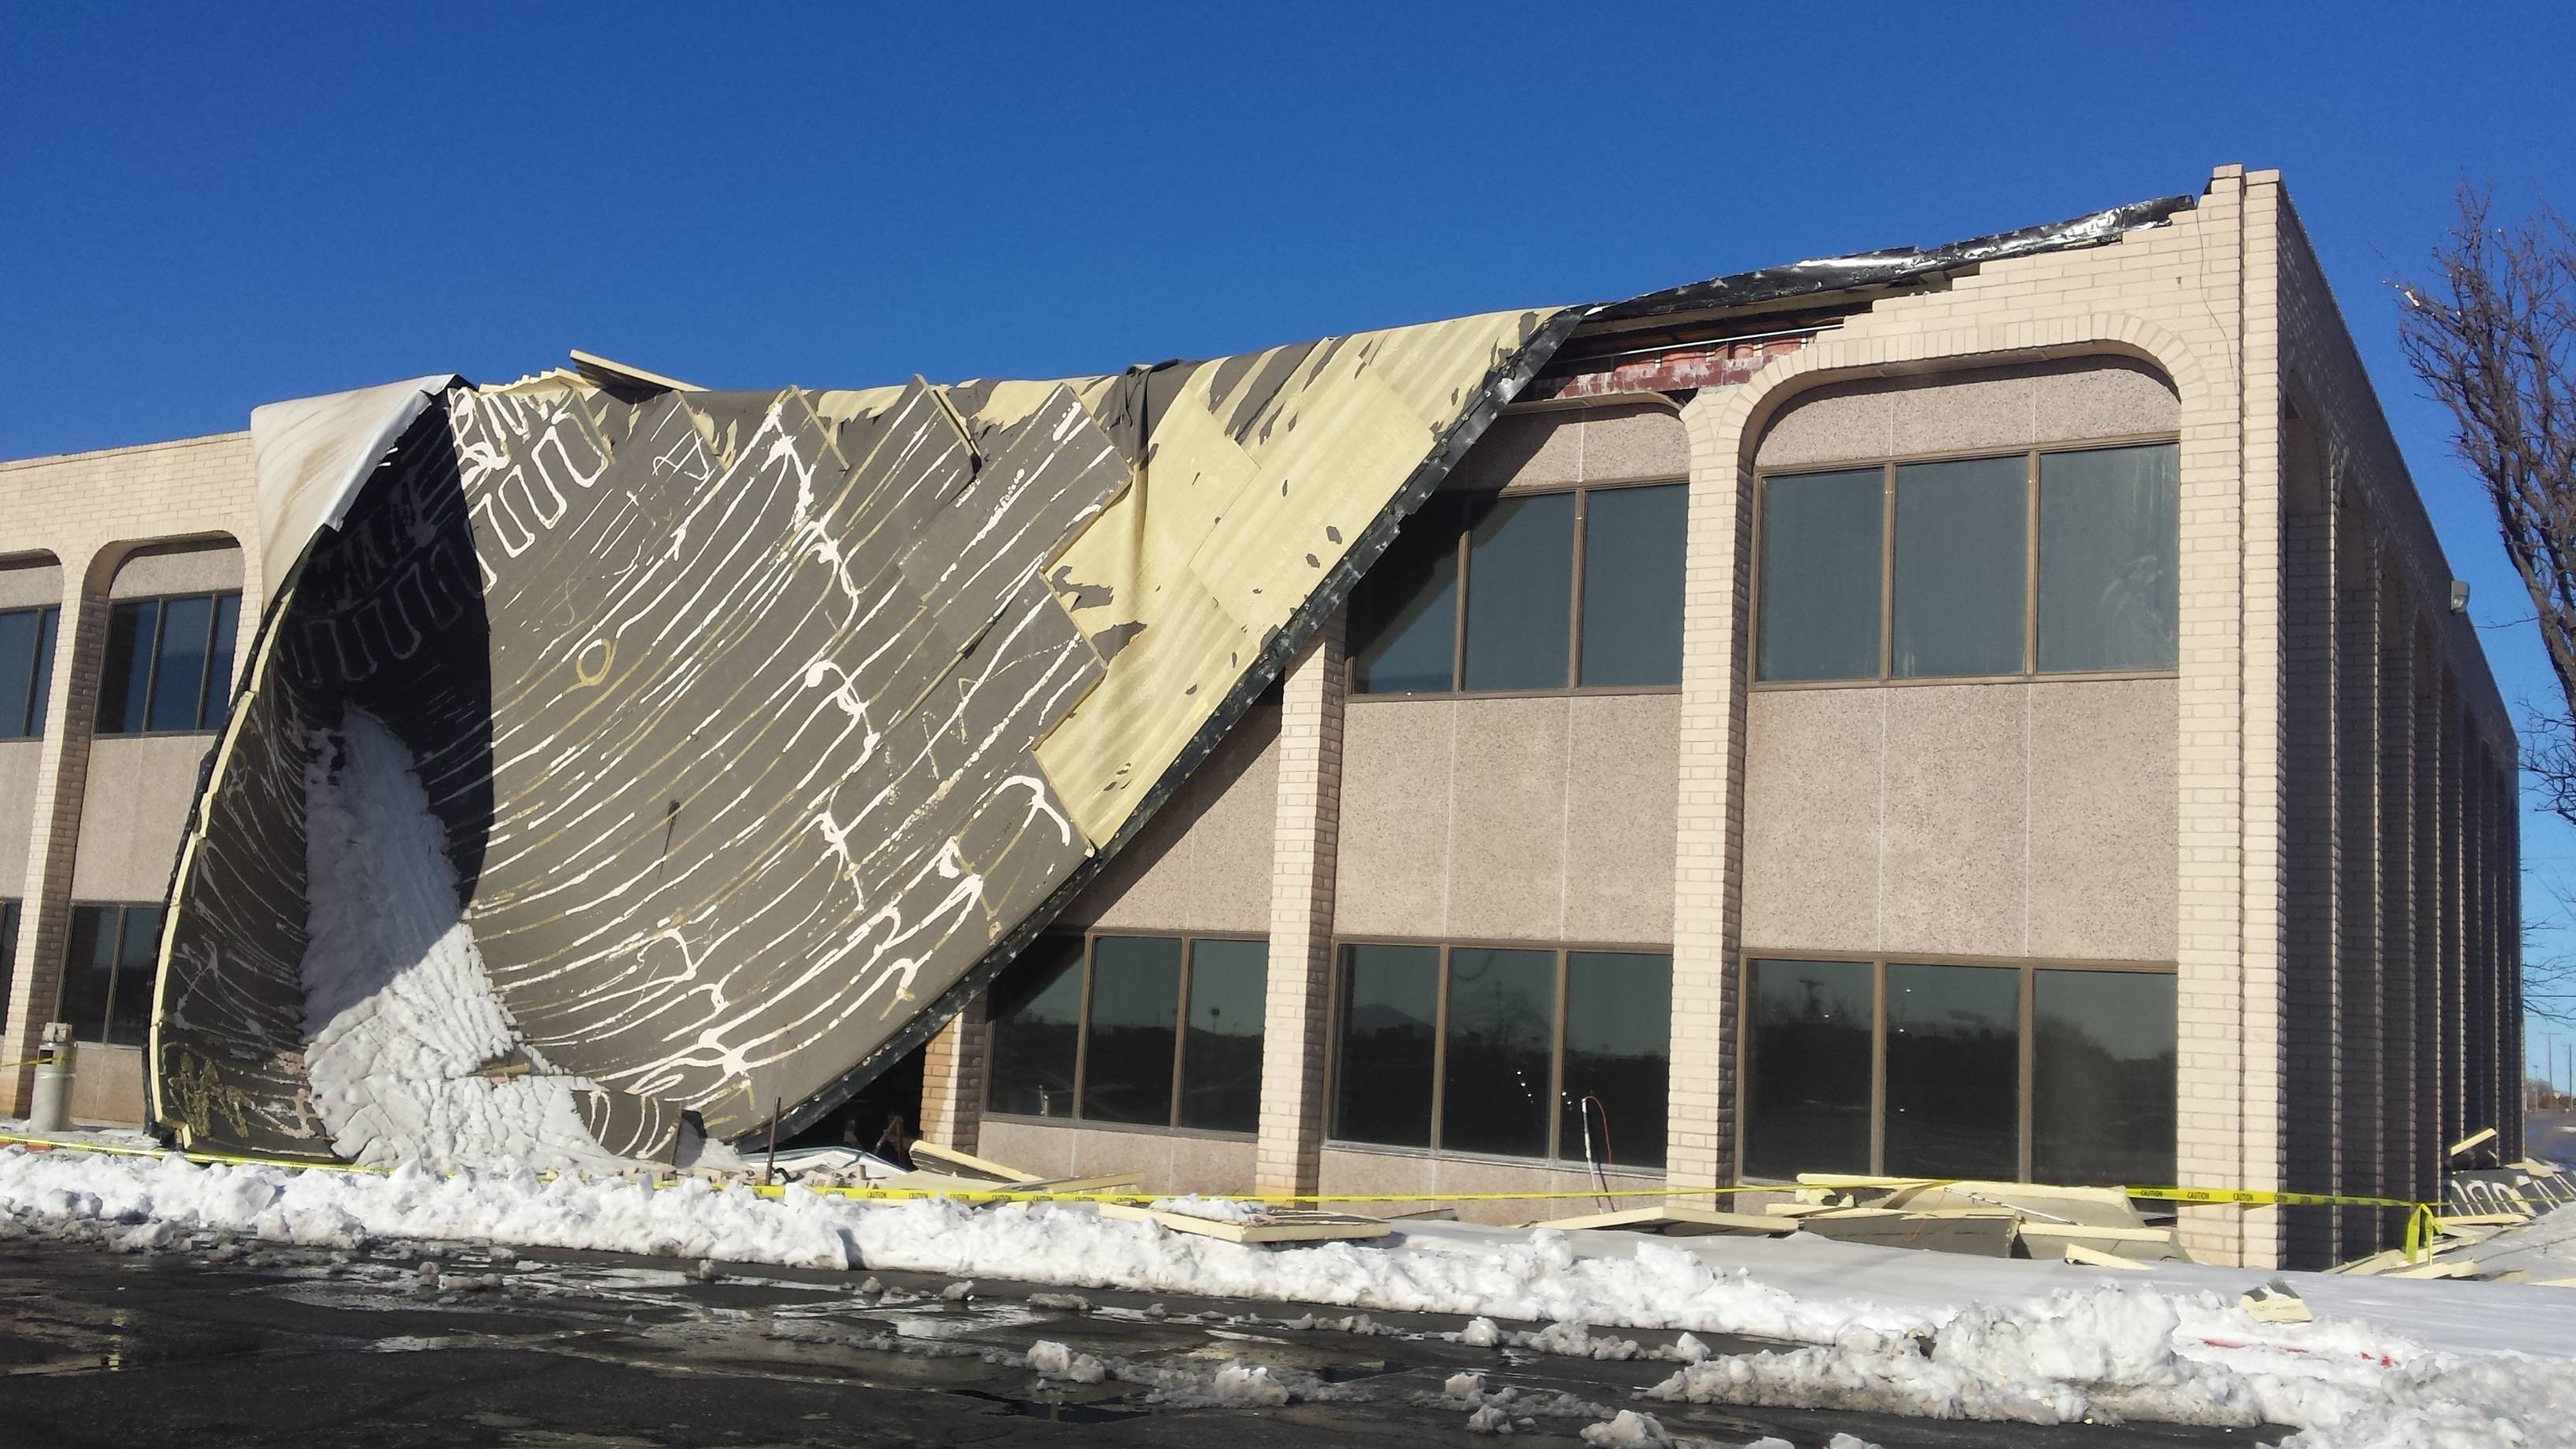 Blizzard pealed the roof off this building.